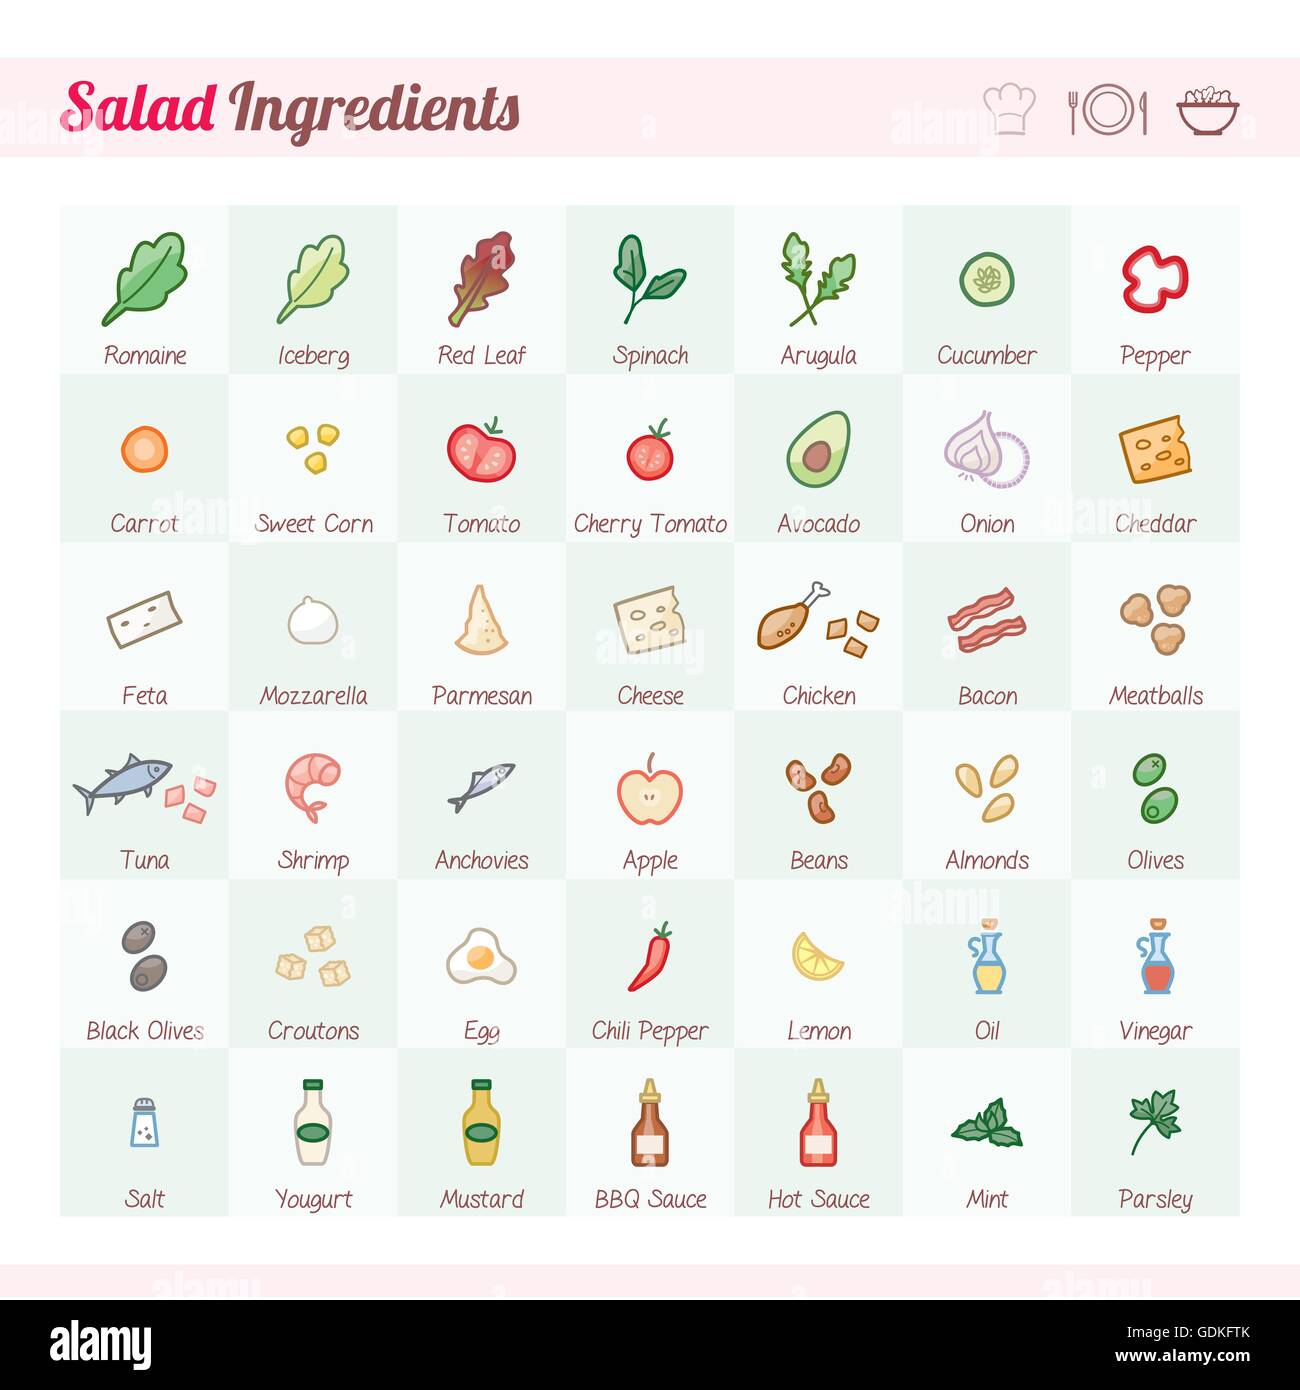 Salad recipe ingredients vector icons set with text Stock Vector